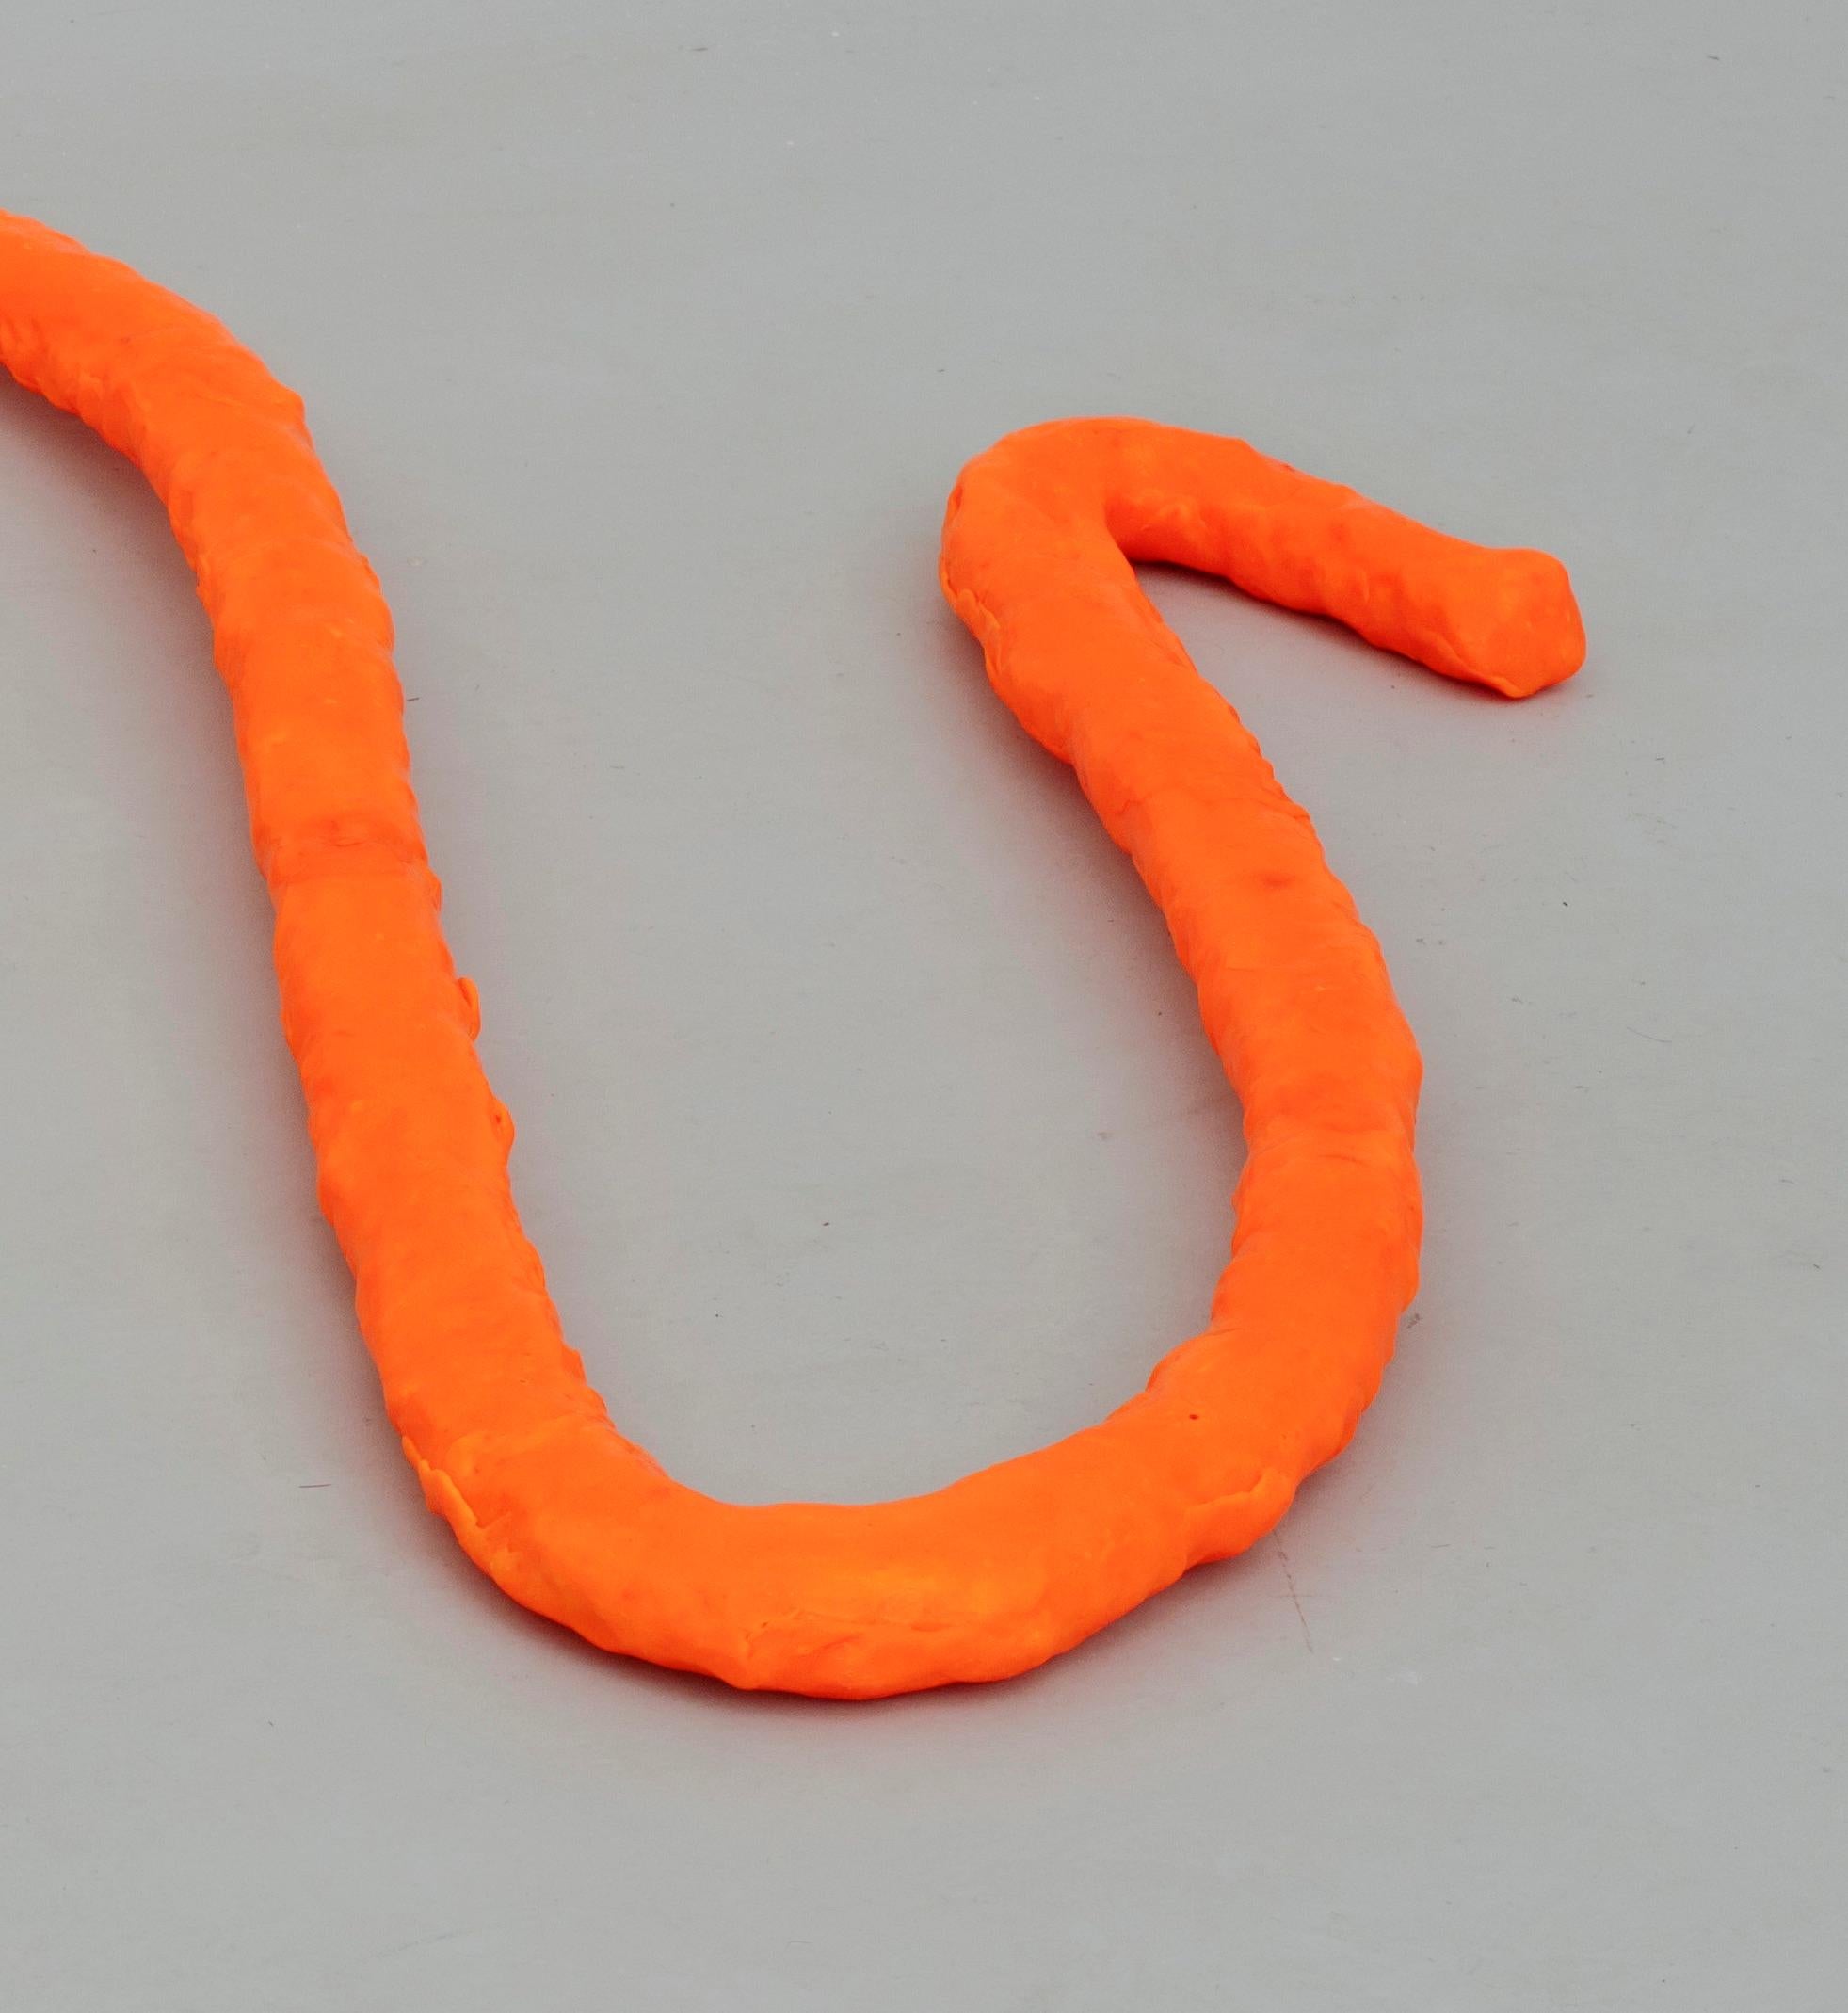 Industrial Contemporary Proto Floor Squiggle Sculpture by Jerszy Seymour